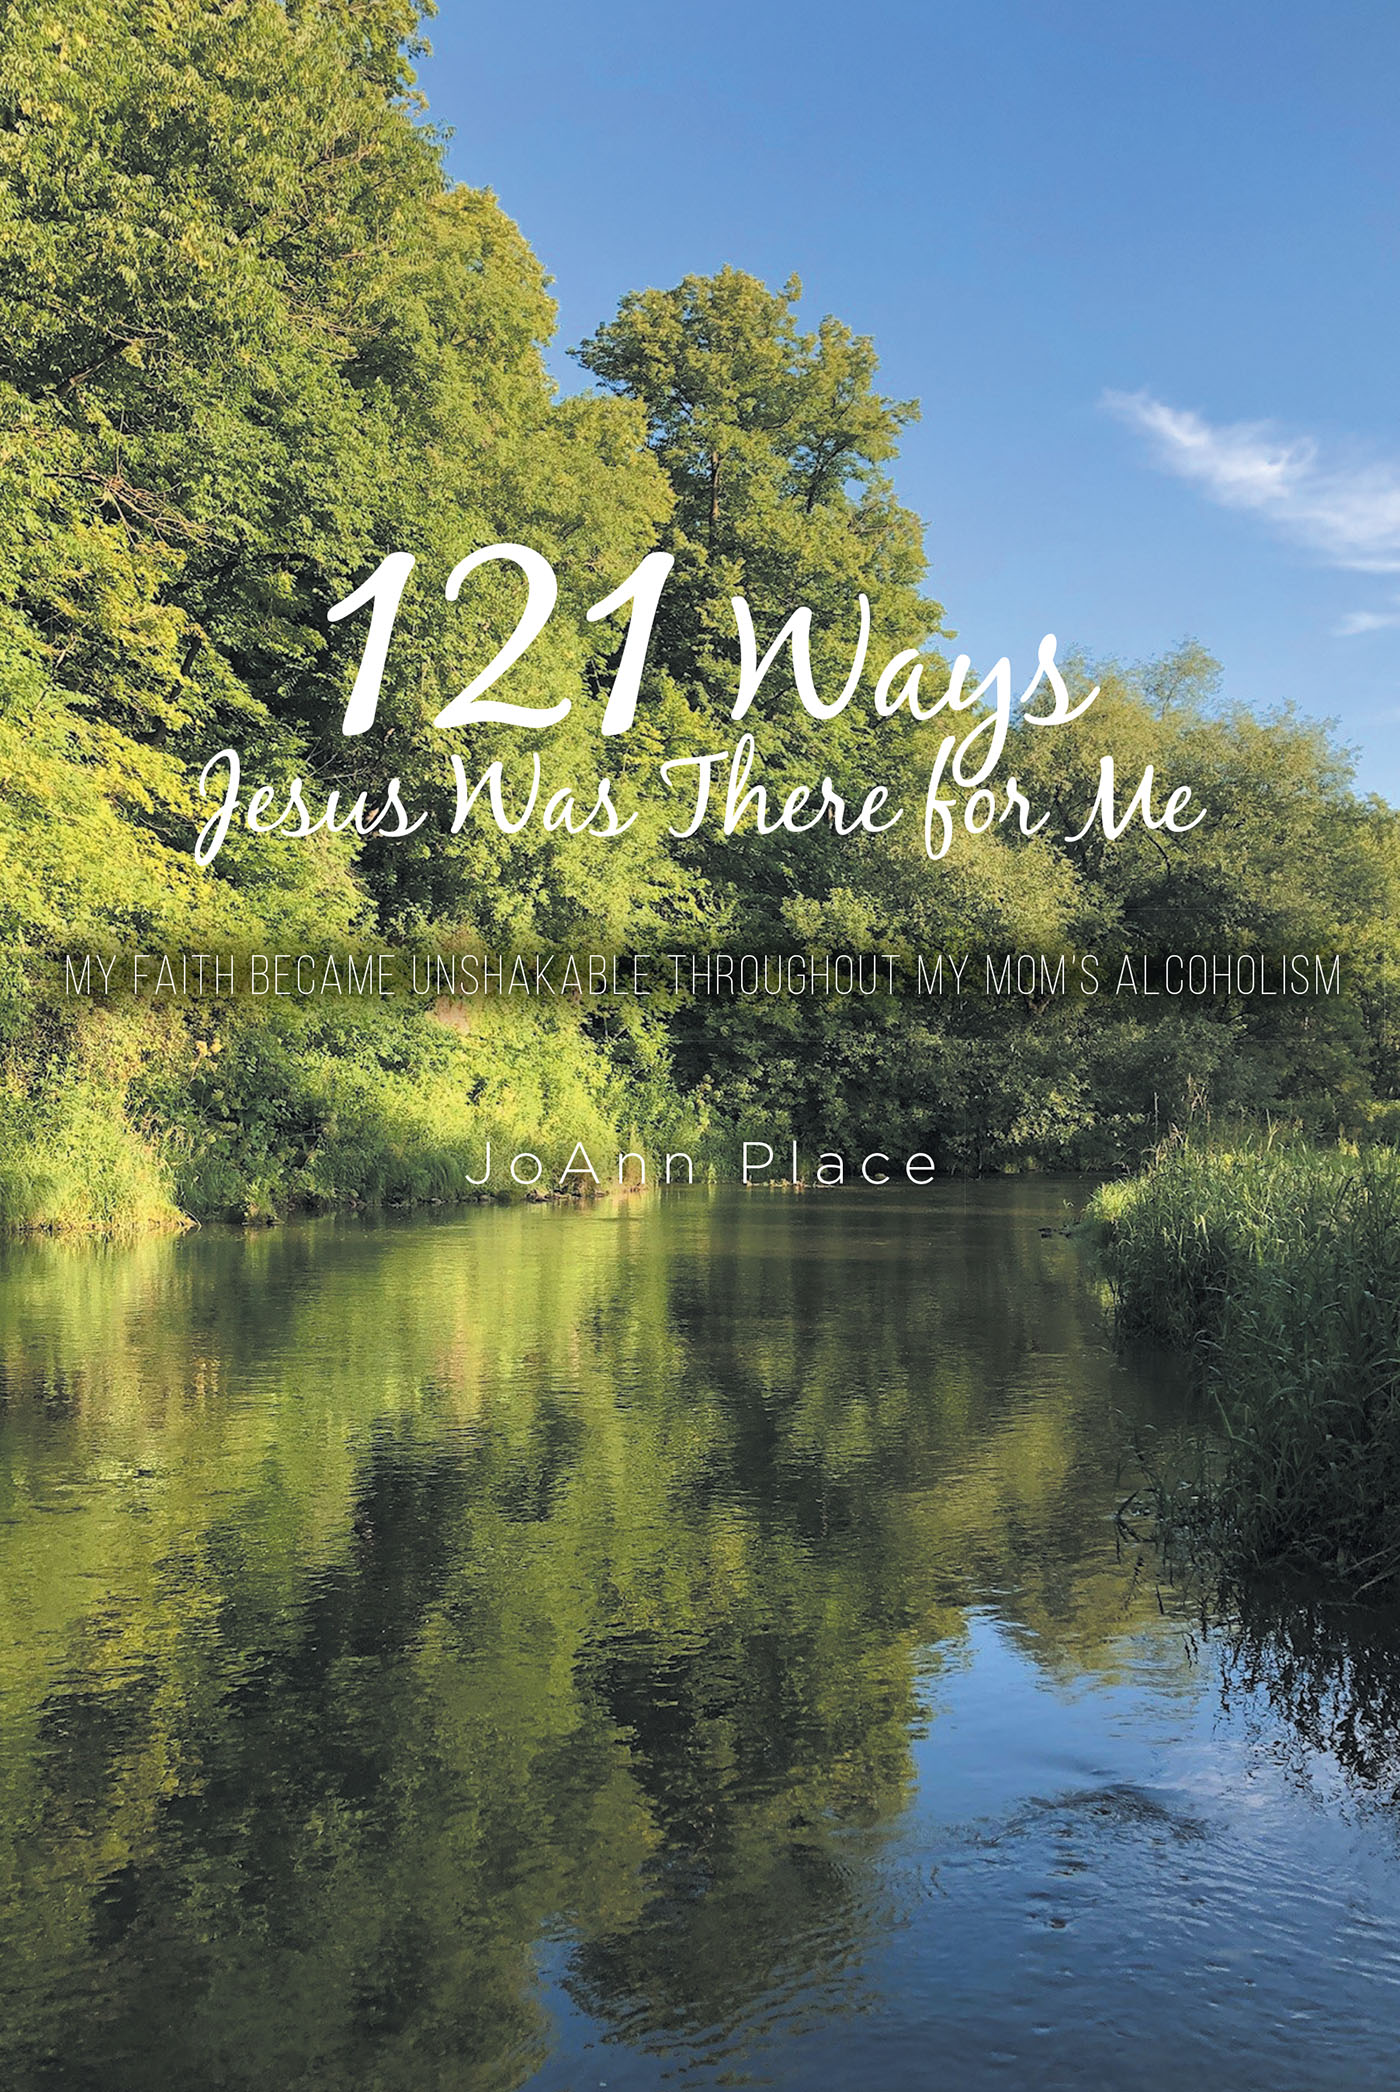 JoAnn Place’s Newly Released “121 Ways Jesus Was There for Me” is an Encouraging Message for Anyone Effected by Alcoholism